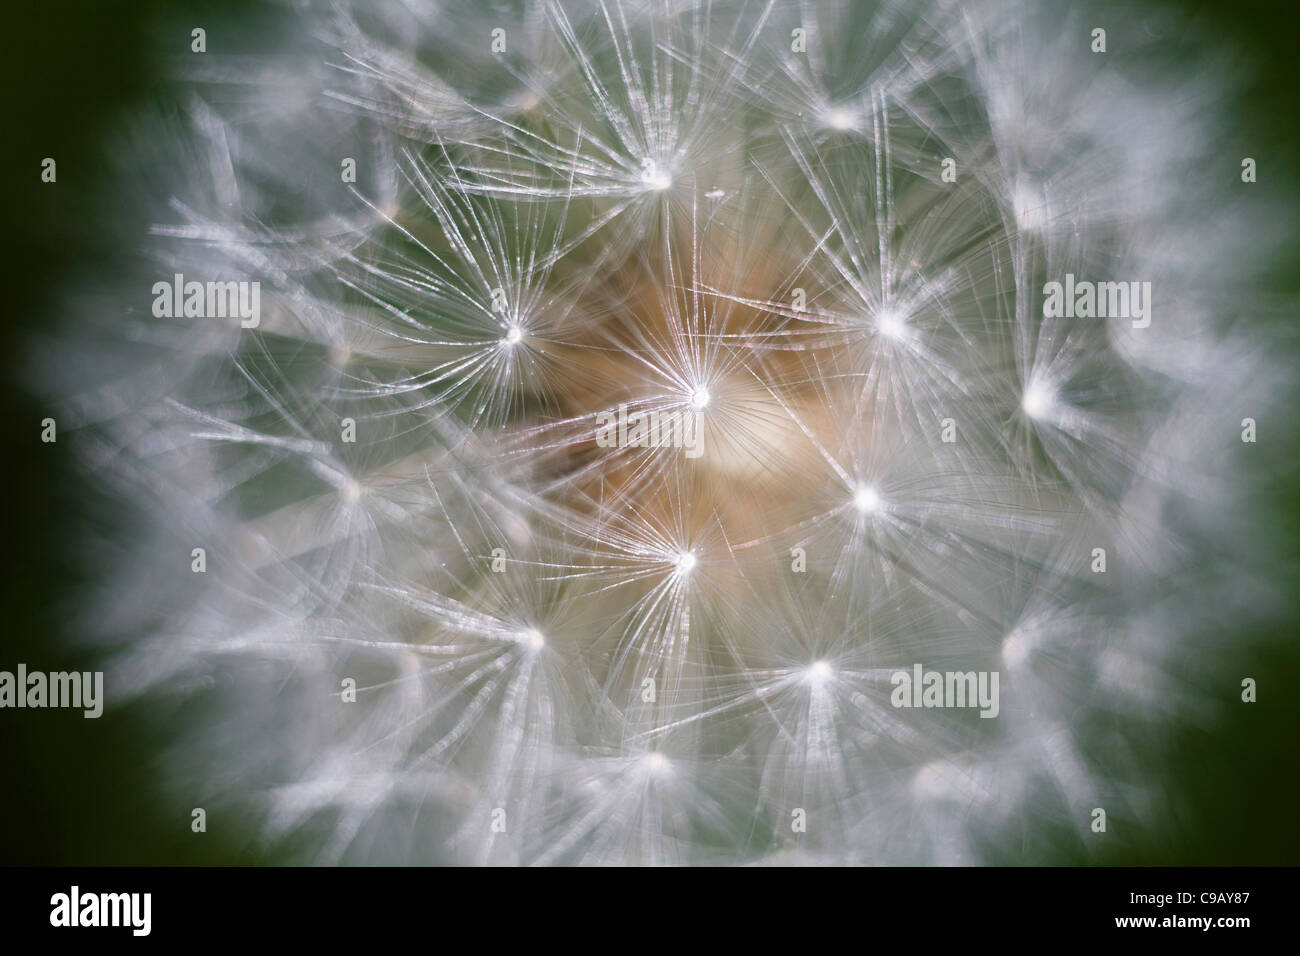 Common English garden weed: Delicate, feathery white dandelion clock close up - complete seed head, view from above Stock Photo